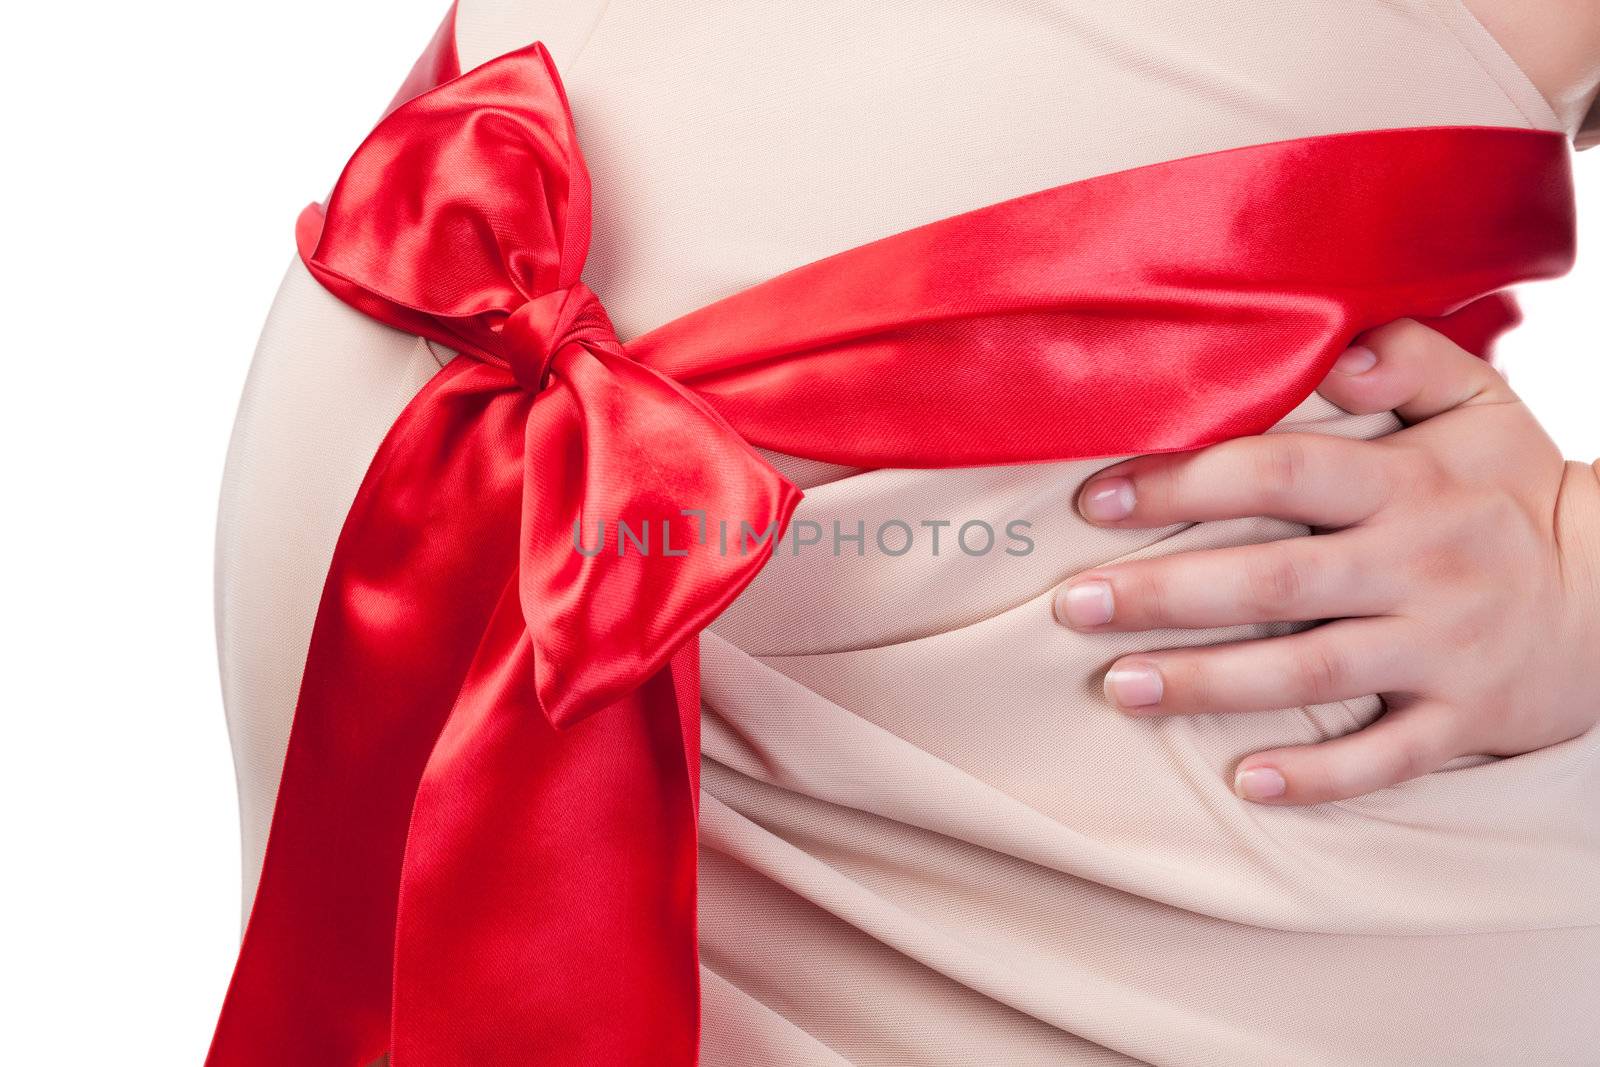 Pregnant Woman's Belly with Red Ribbon, closeup